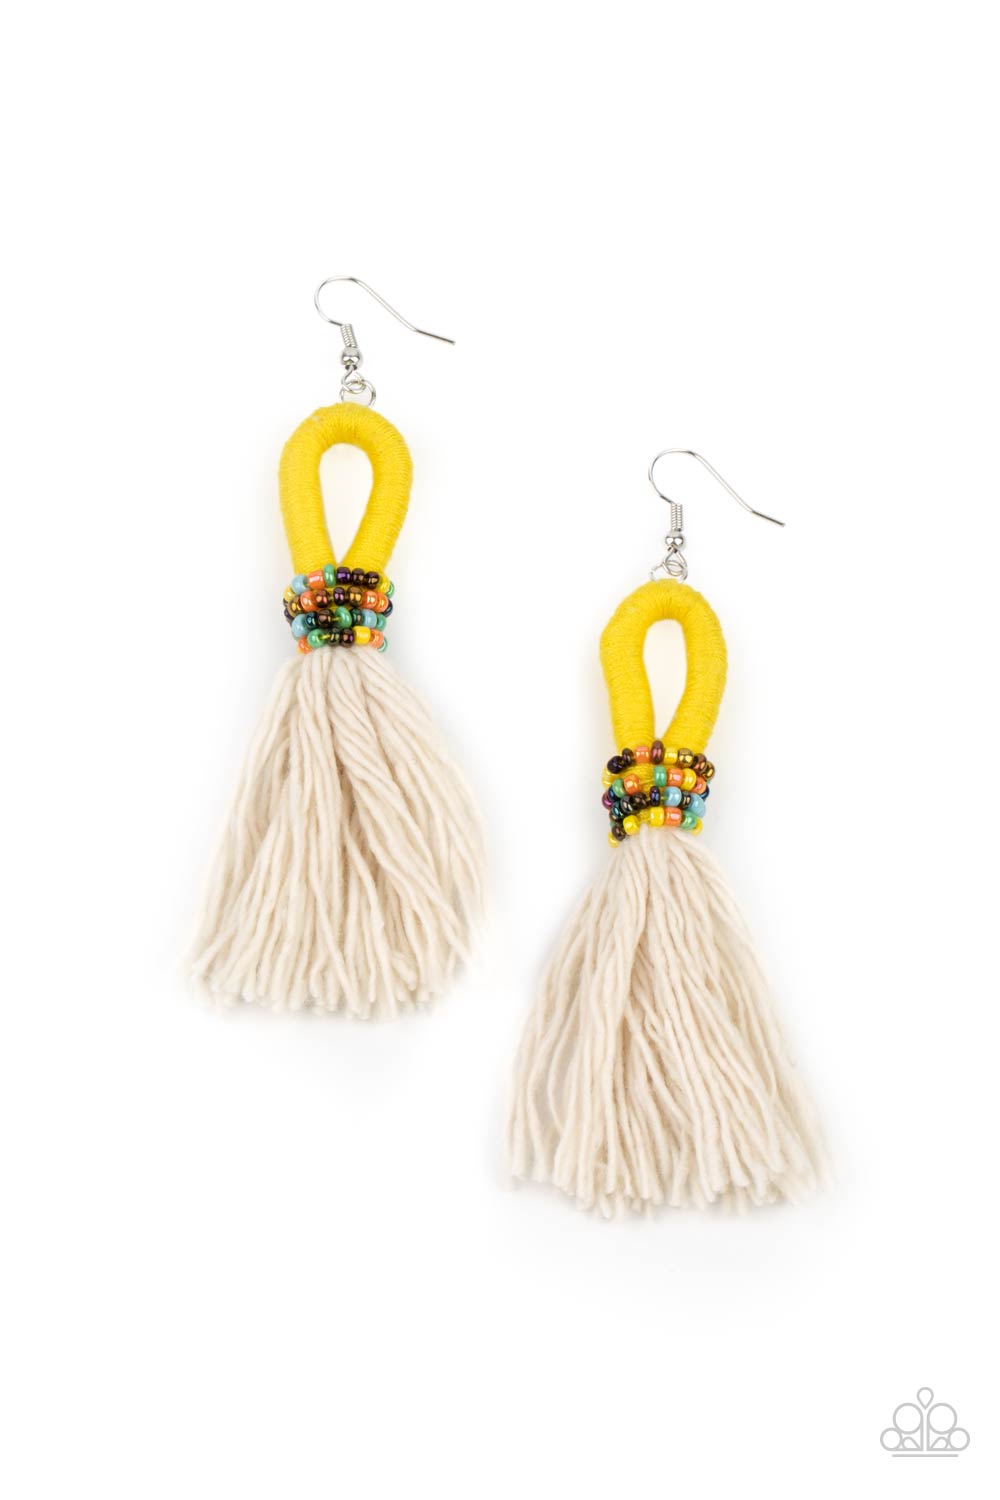 The Dustup - Yellow Earrings a tassel of soft white cotton fans out under rows of brightly colored seed beads. Anchored by a loop of vibrant yellow floss, the eye-catching style swings from the ear for a show-stopping statement. Earring attaches to a standard fishhook fitting.  Sold as one pair of earrings.  Paparazzi Jewelry is lead and nickel free so it's perfect for sensitive skin too!